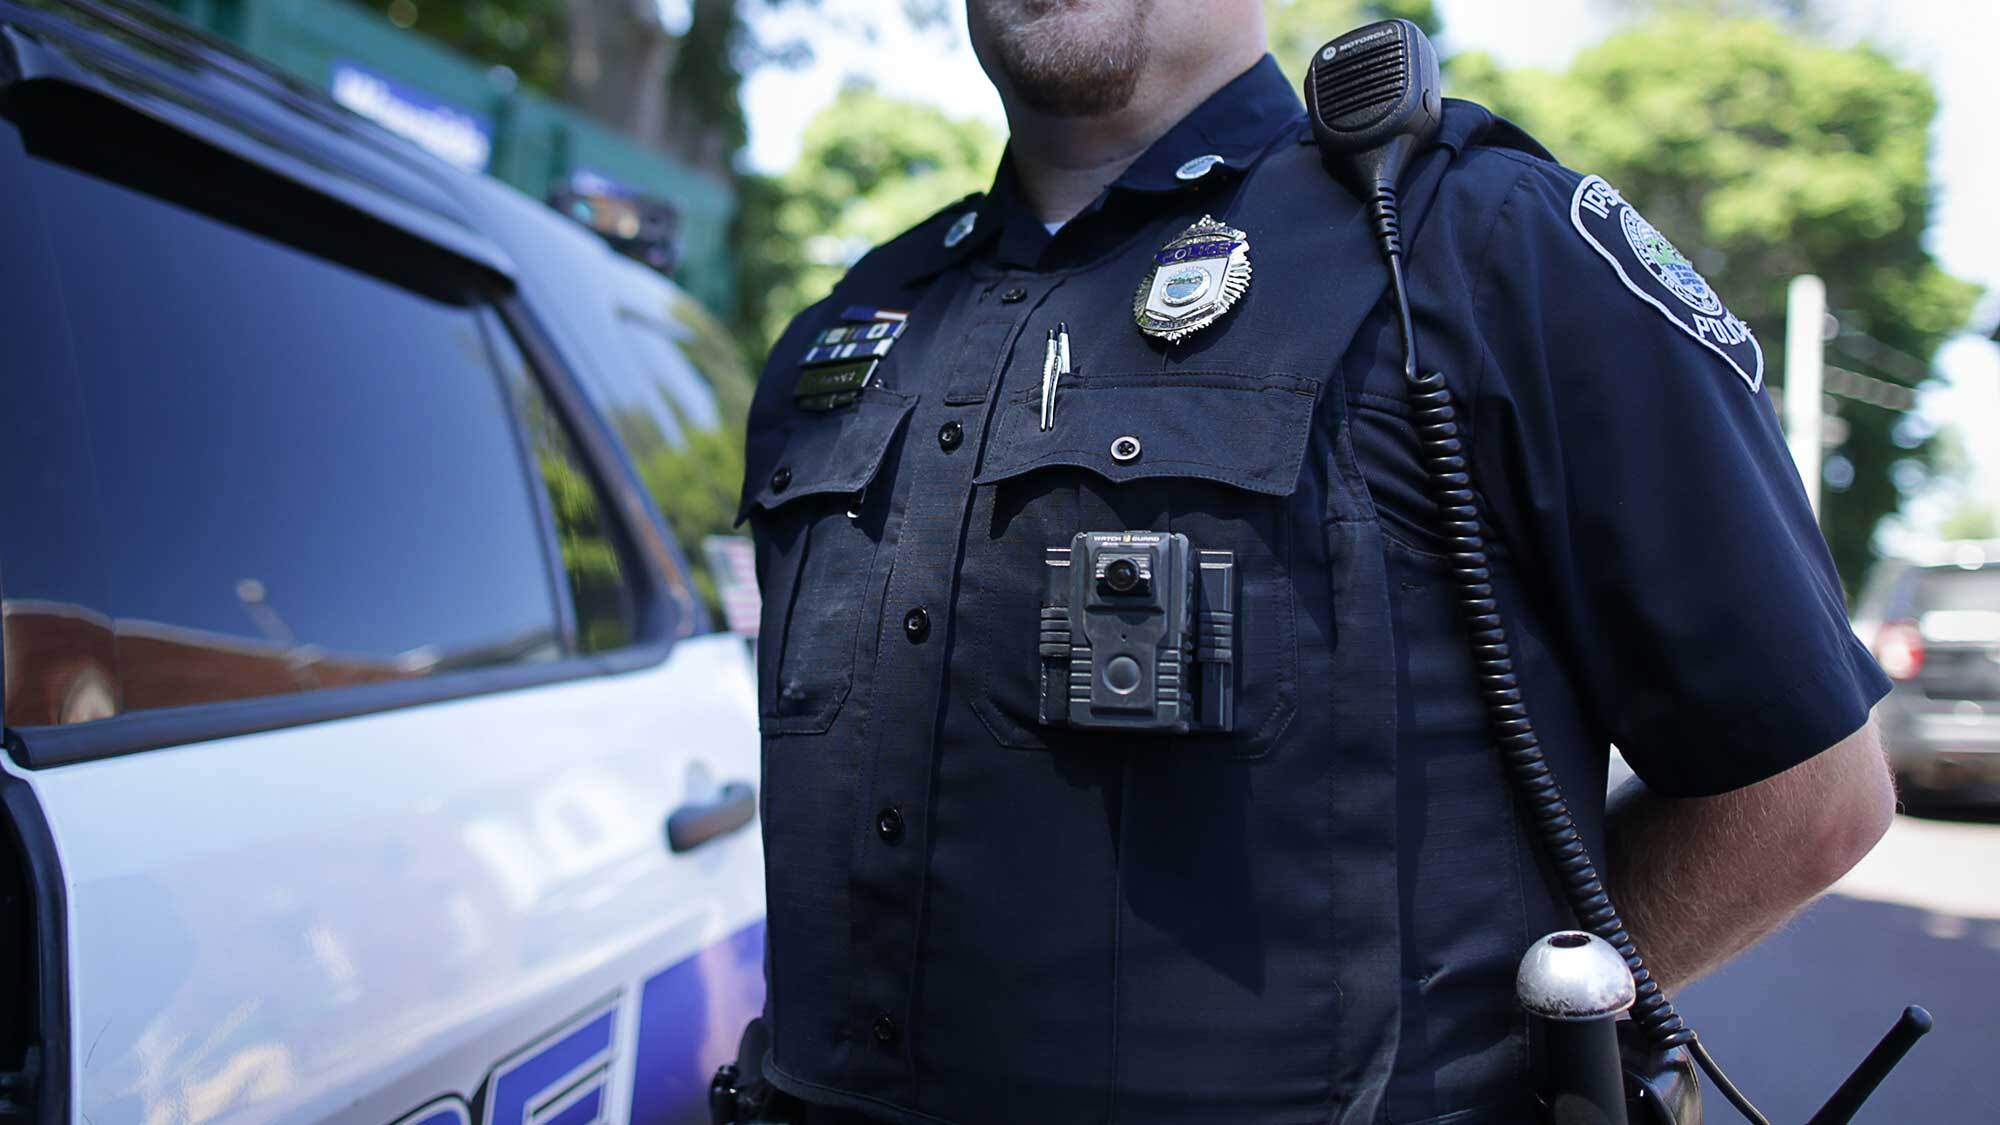 Do body cameras affect police officers' behavior? Not so much